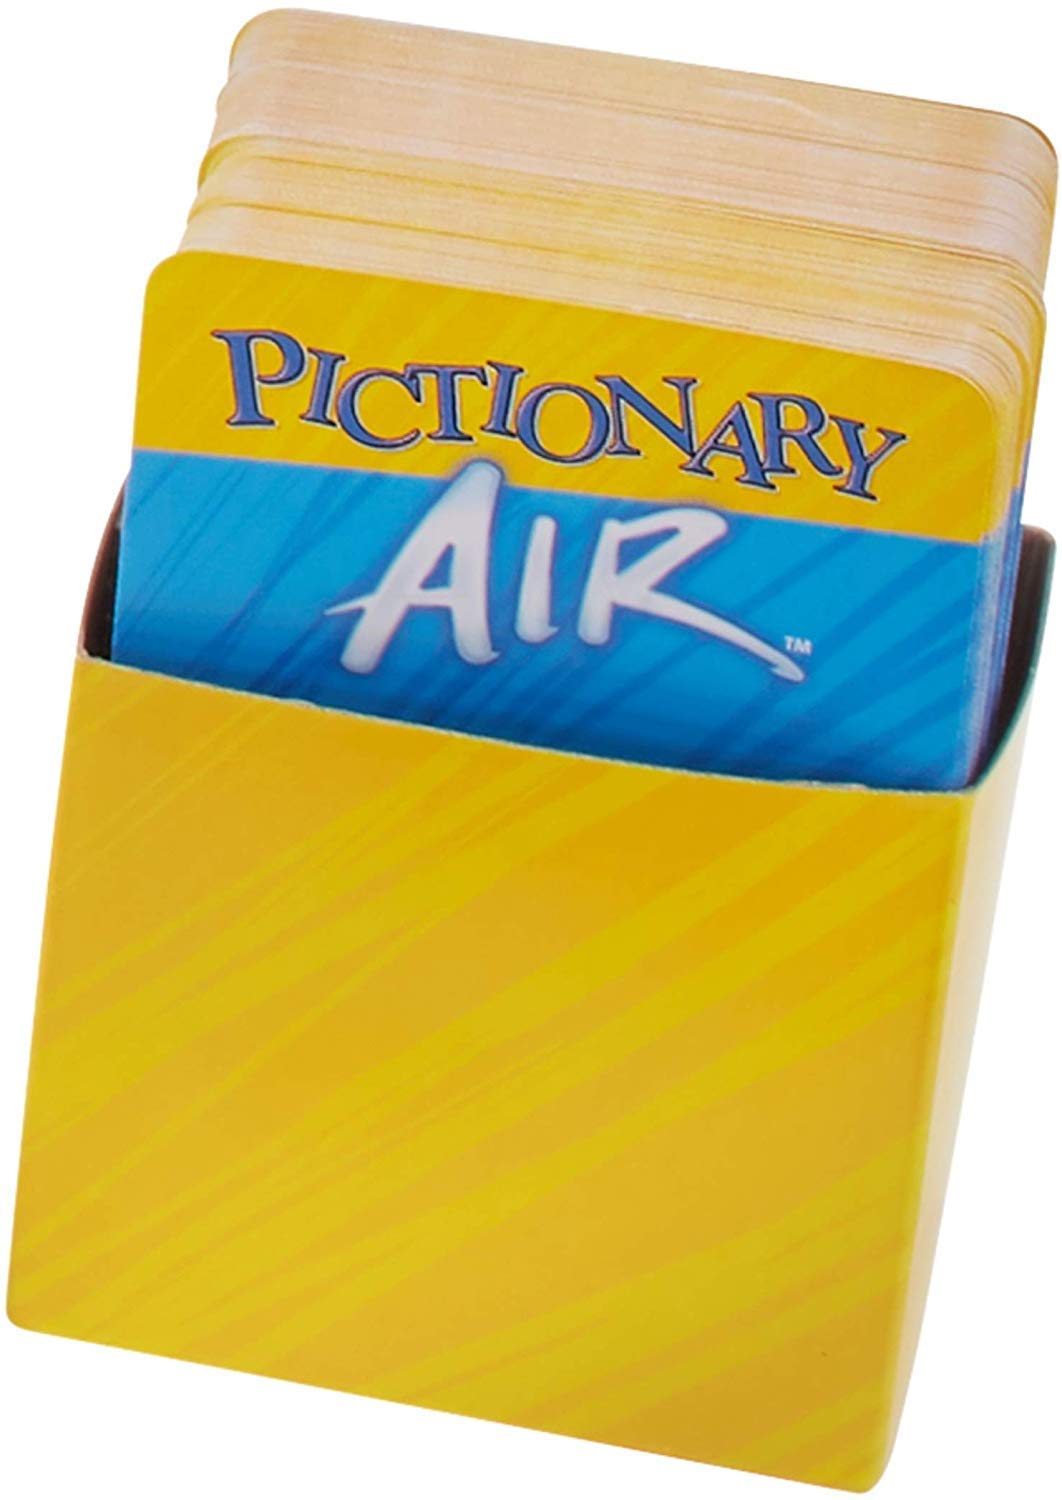 Pictionary Air Family Game for Kids & Adults with Light Pen and Clue Cards, Connect to Smart Devices (Amazon Exclusive)